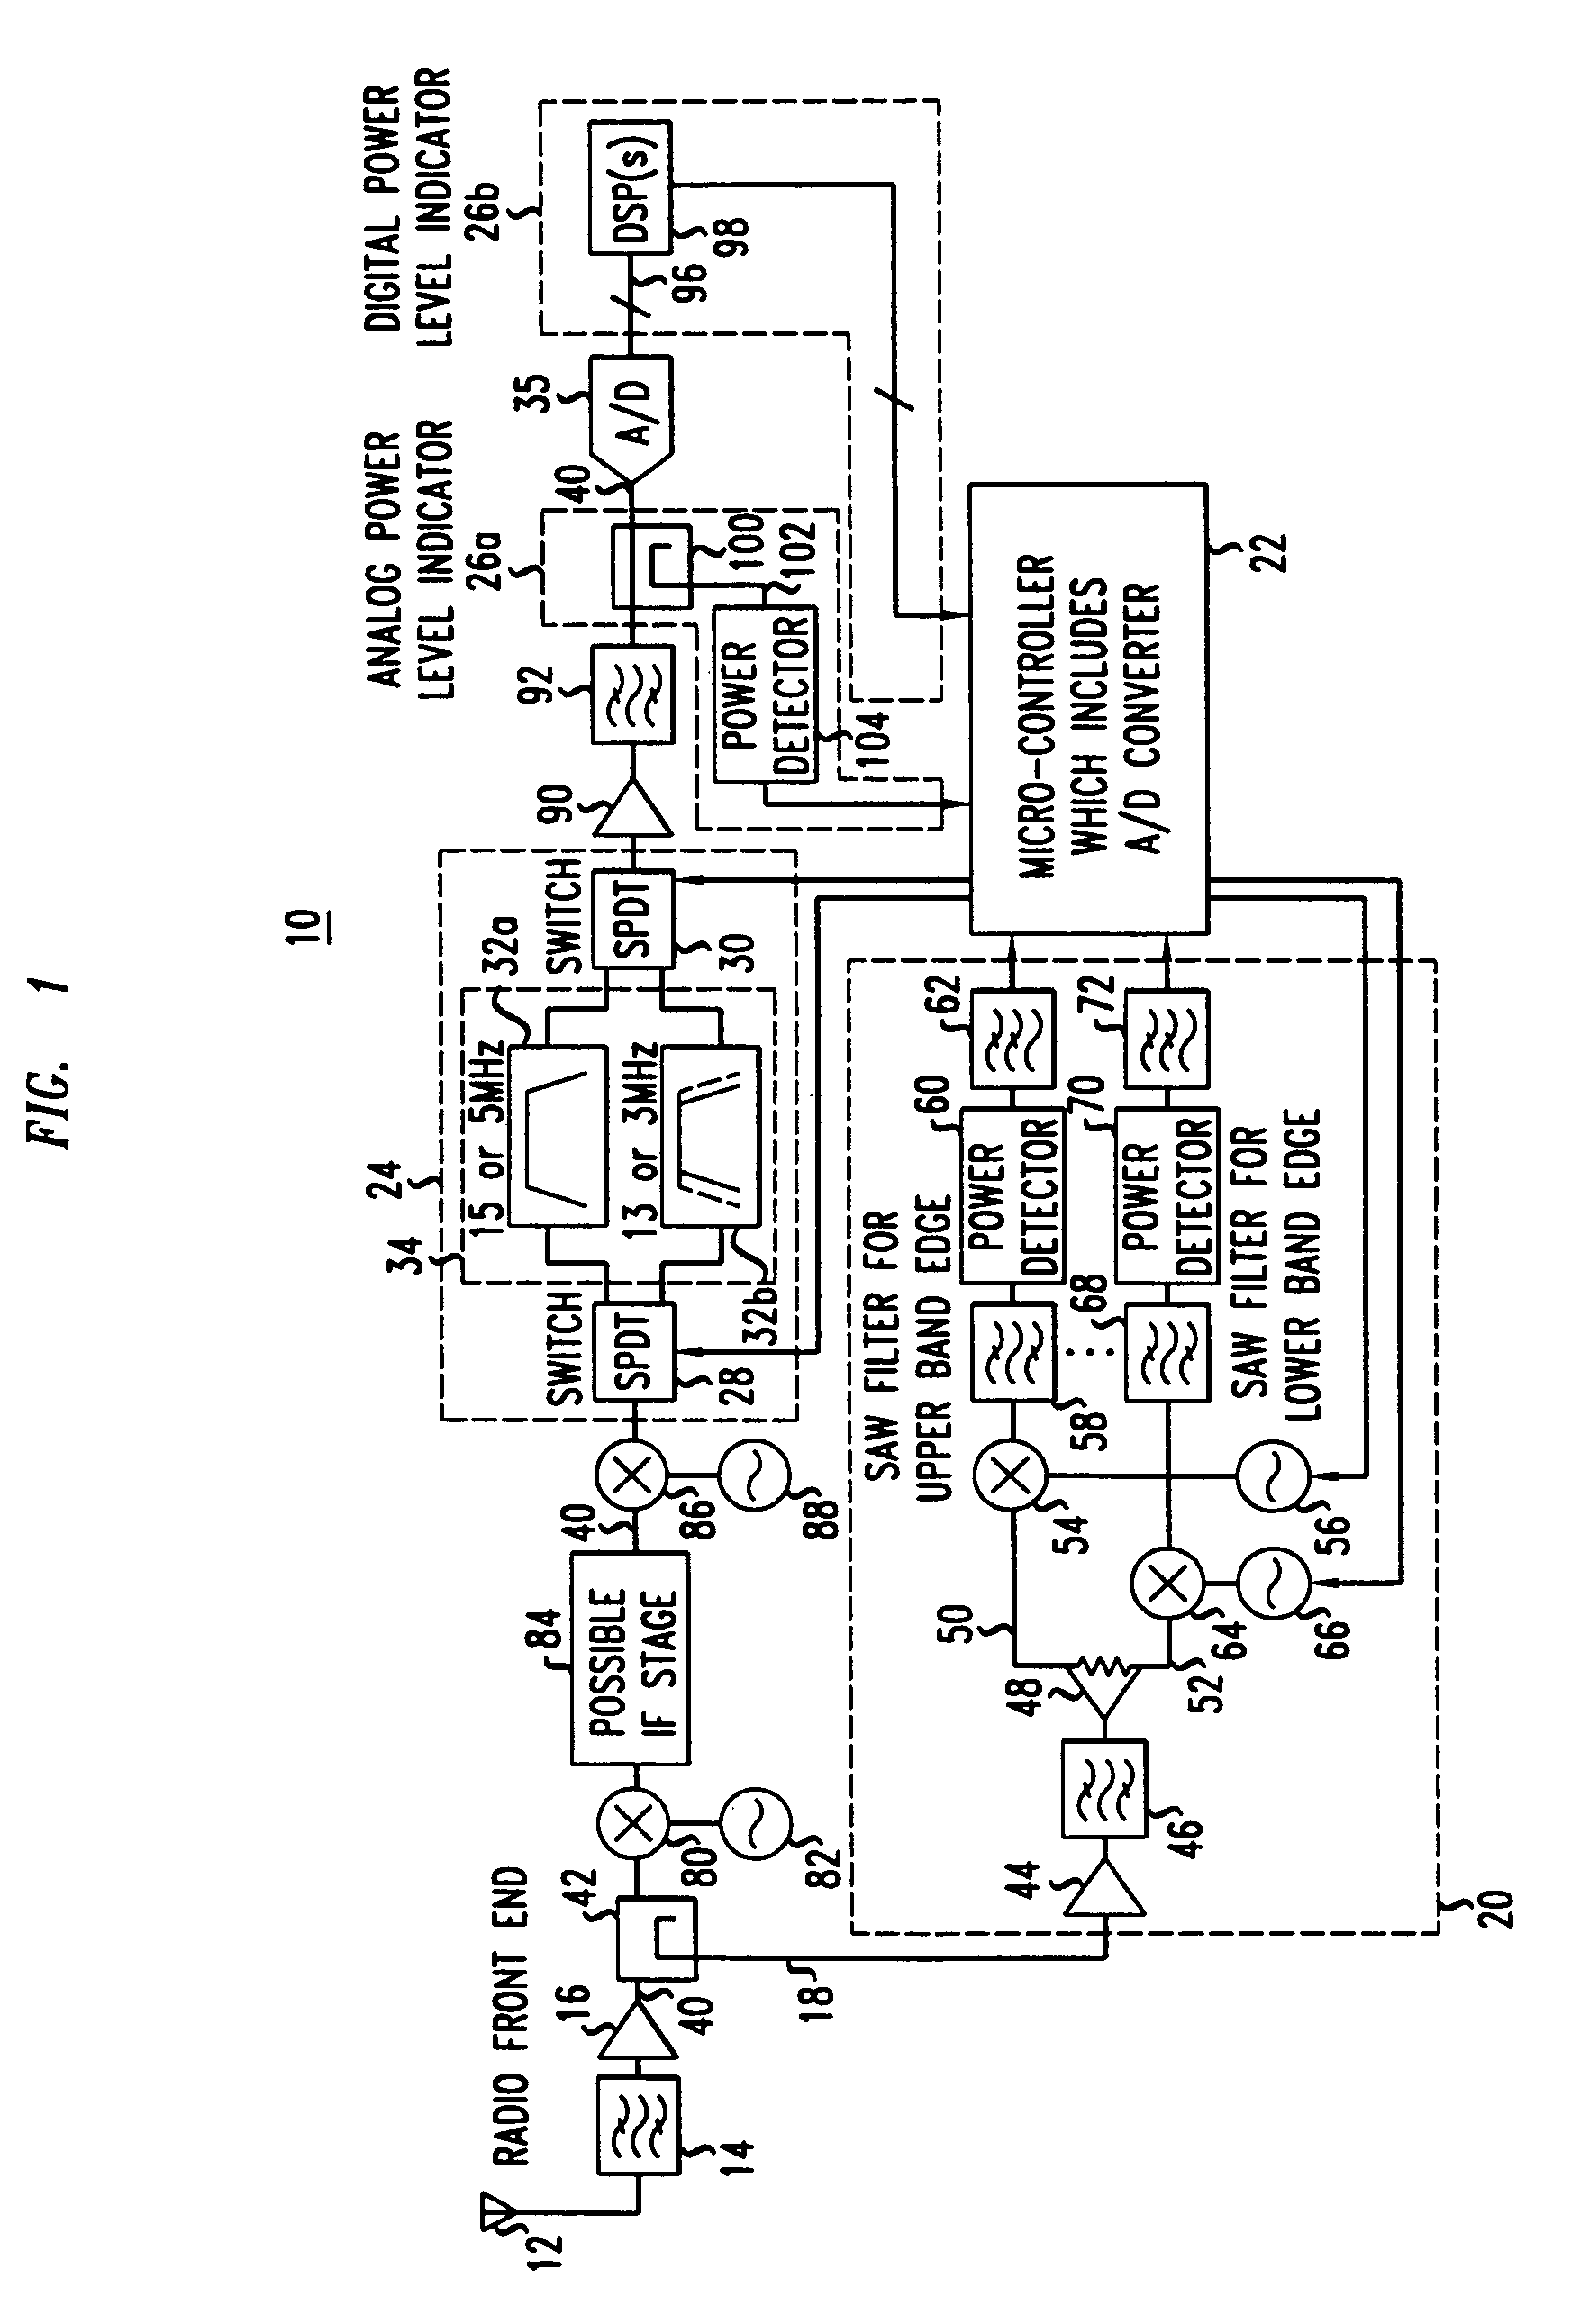 Band edge amplitude reduction system and method